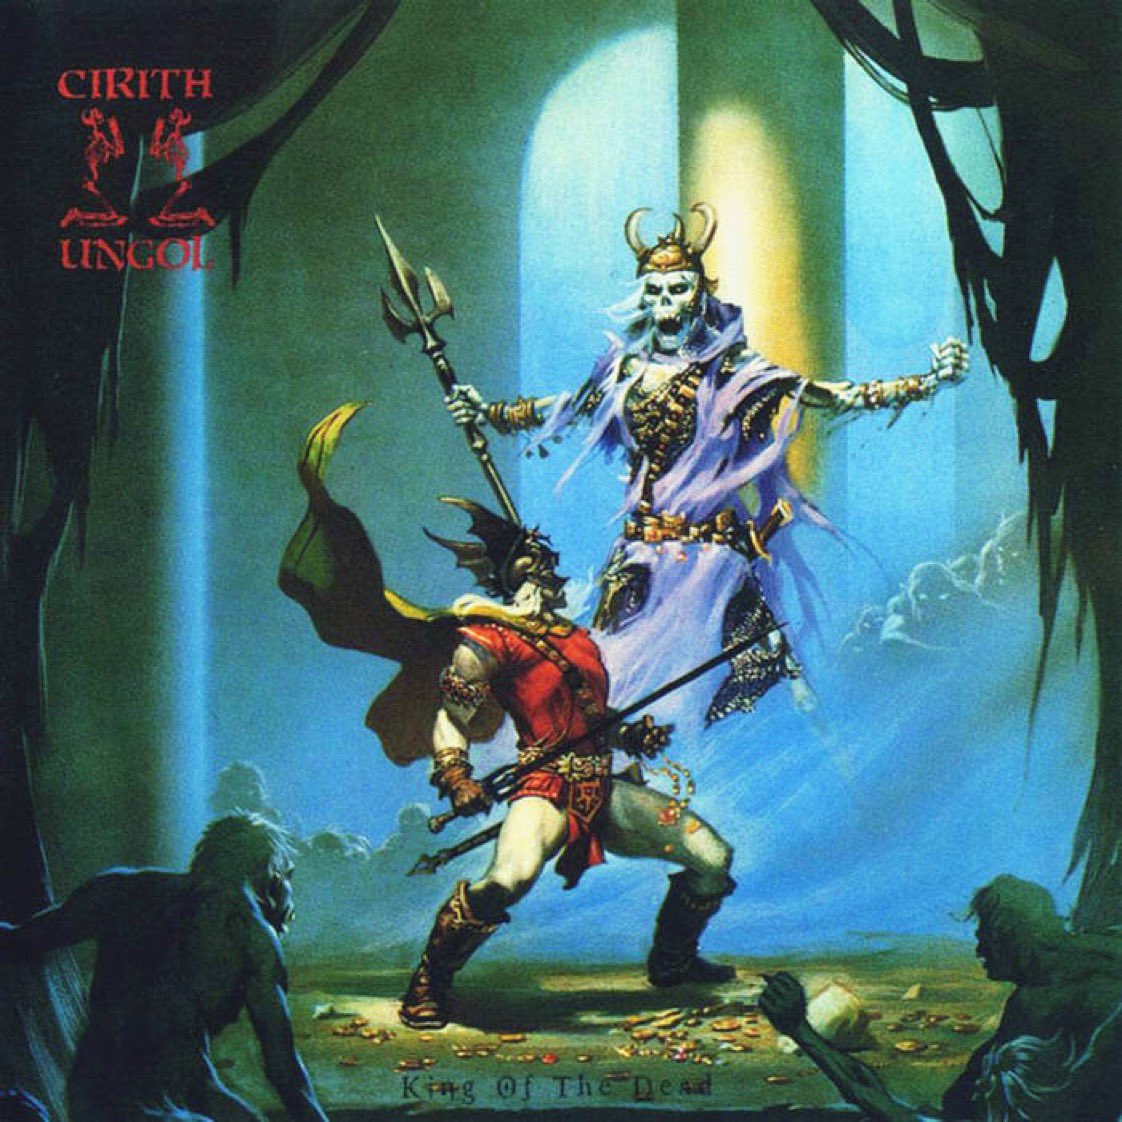 Eb8jr2FVcAATNBl RT @MetalBlade: A heavy metal MASTERPIECE in every sense of the word! @CirithU's #KingoftheDead celebrates it's 36th year of existence! #cirithungol LEGIONS, share with us your most fondest memories of this record! ?: https://t.co/MgjAP4uisV https://t.co/W5YaEwwM0d | Cirith Ungol Online